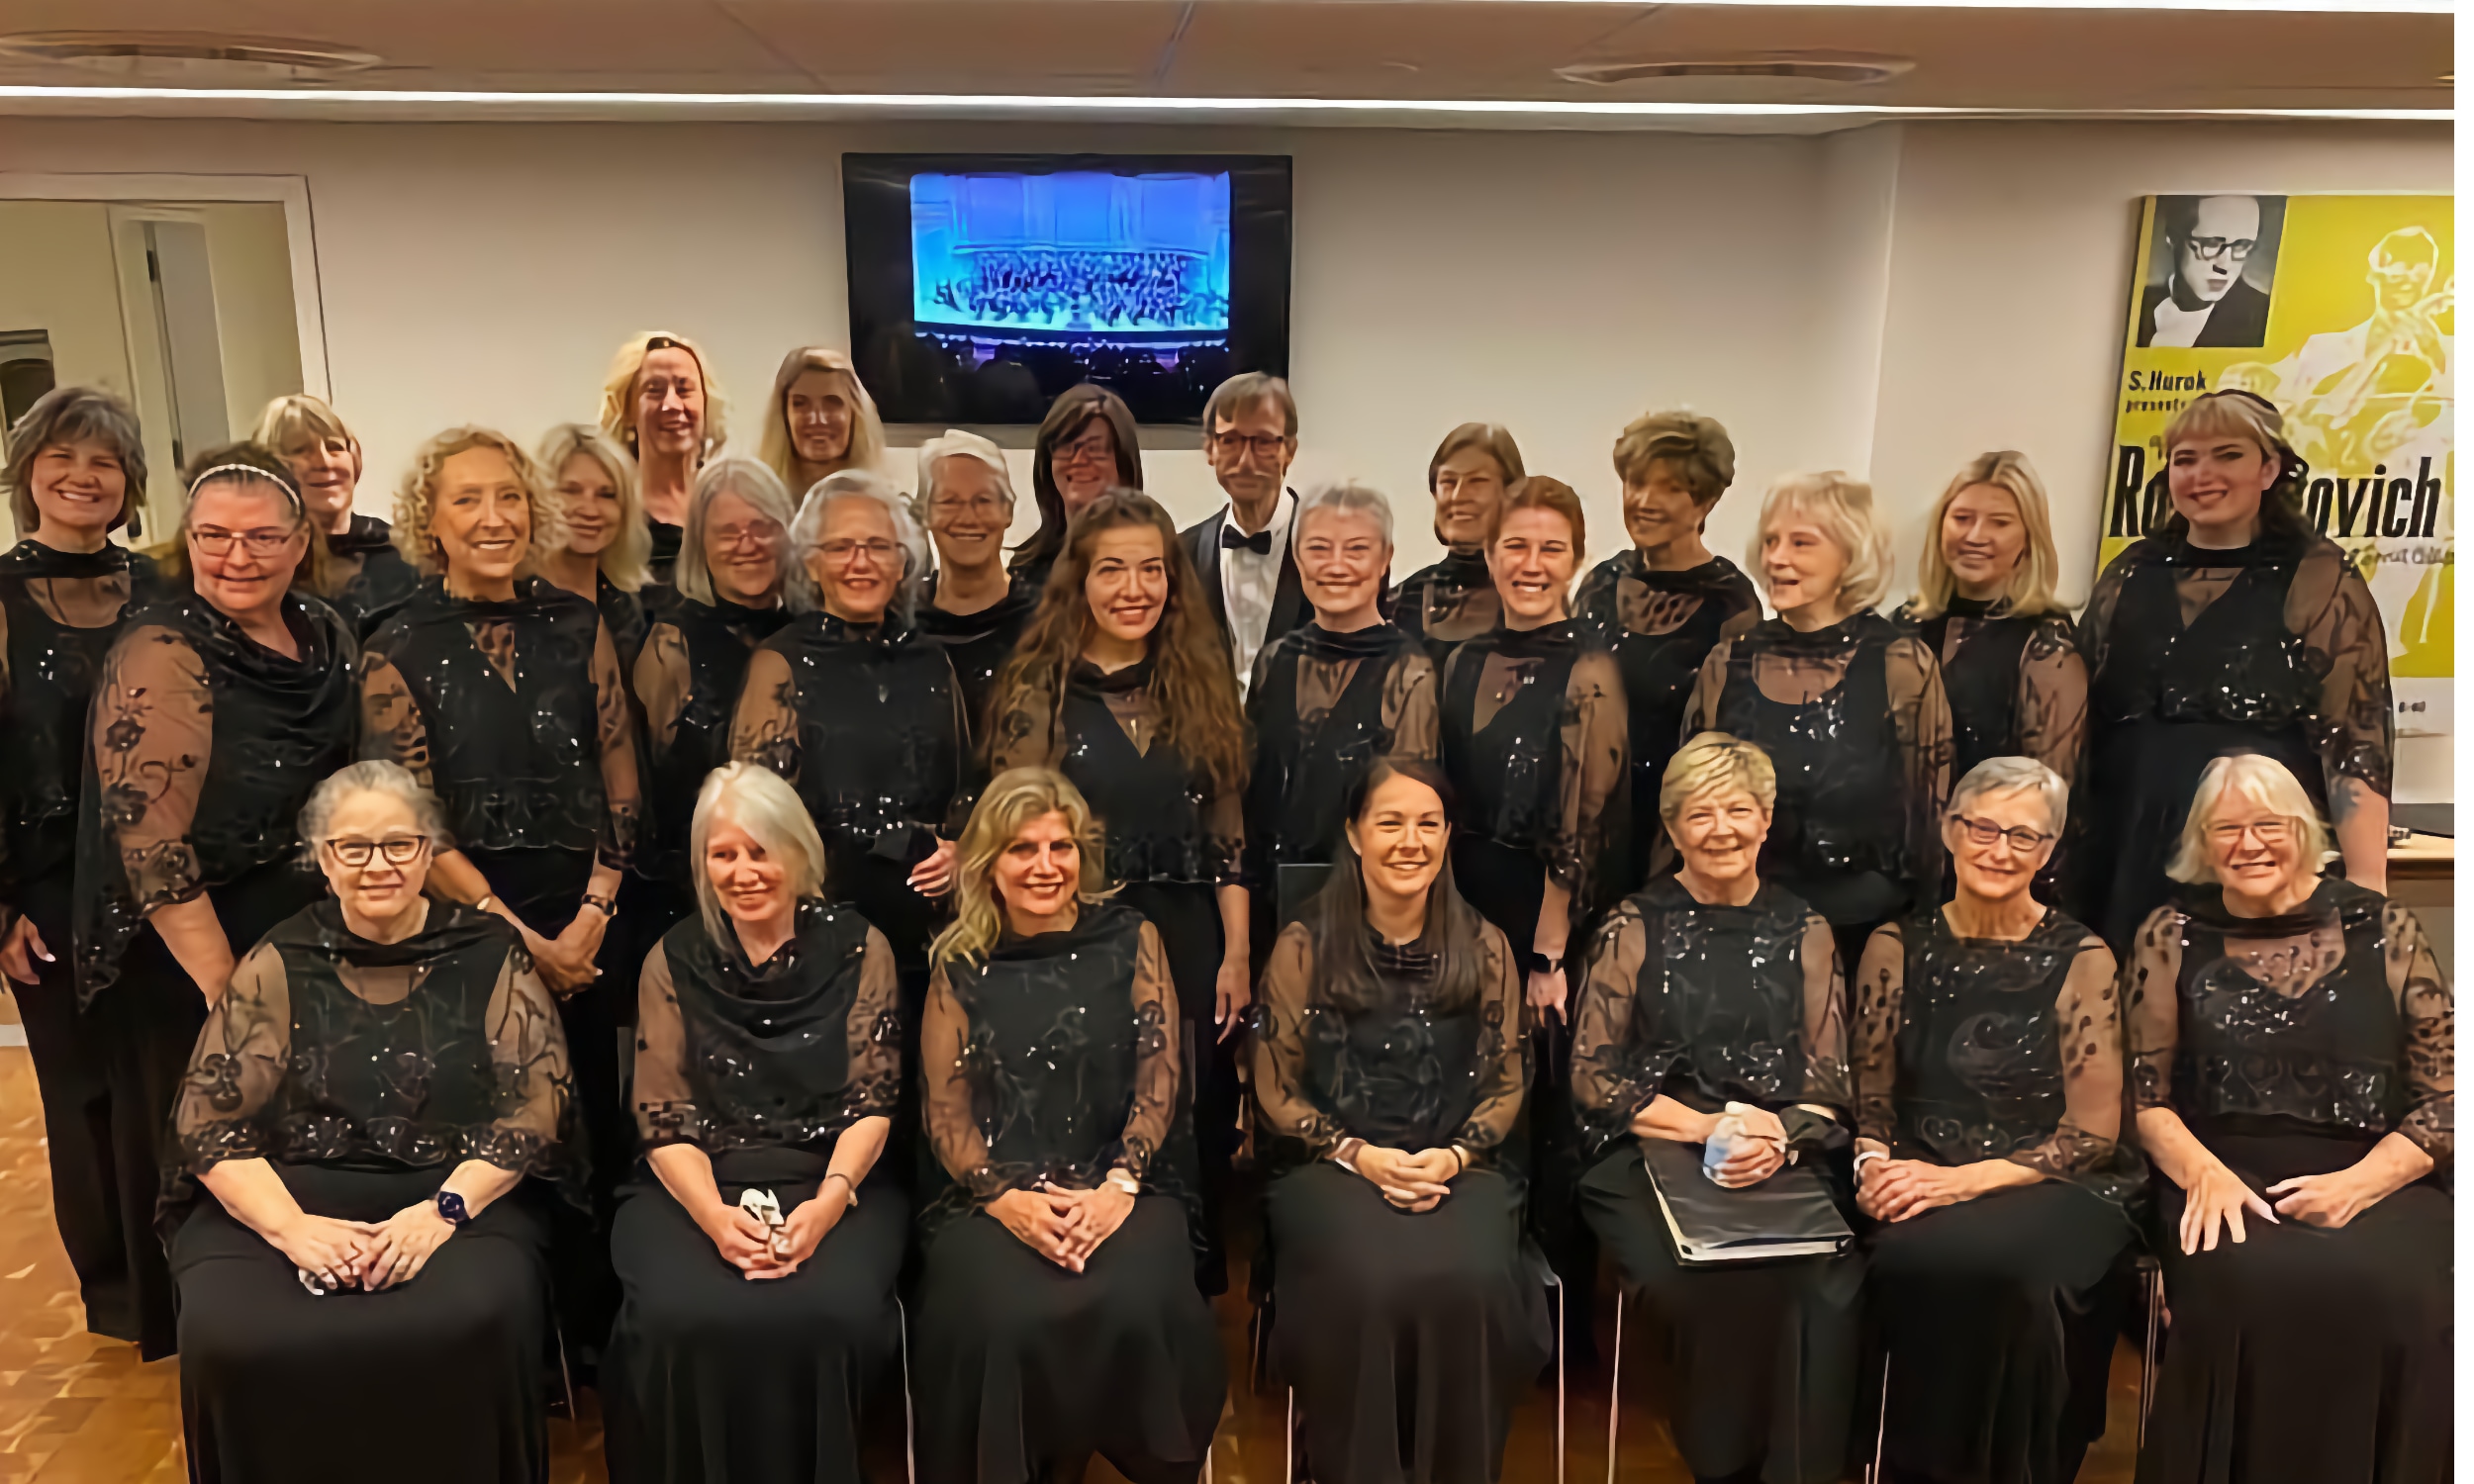 Women of the North Florida Women's Chorale, grouped for a formal photo, all wearing black dresses